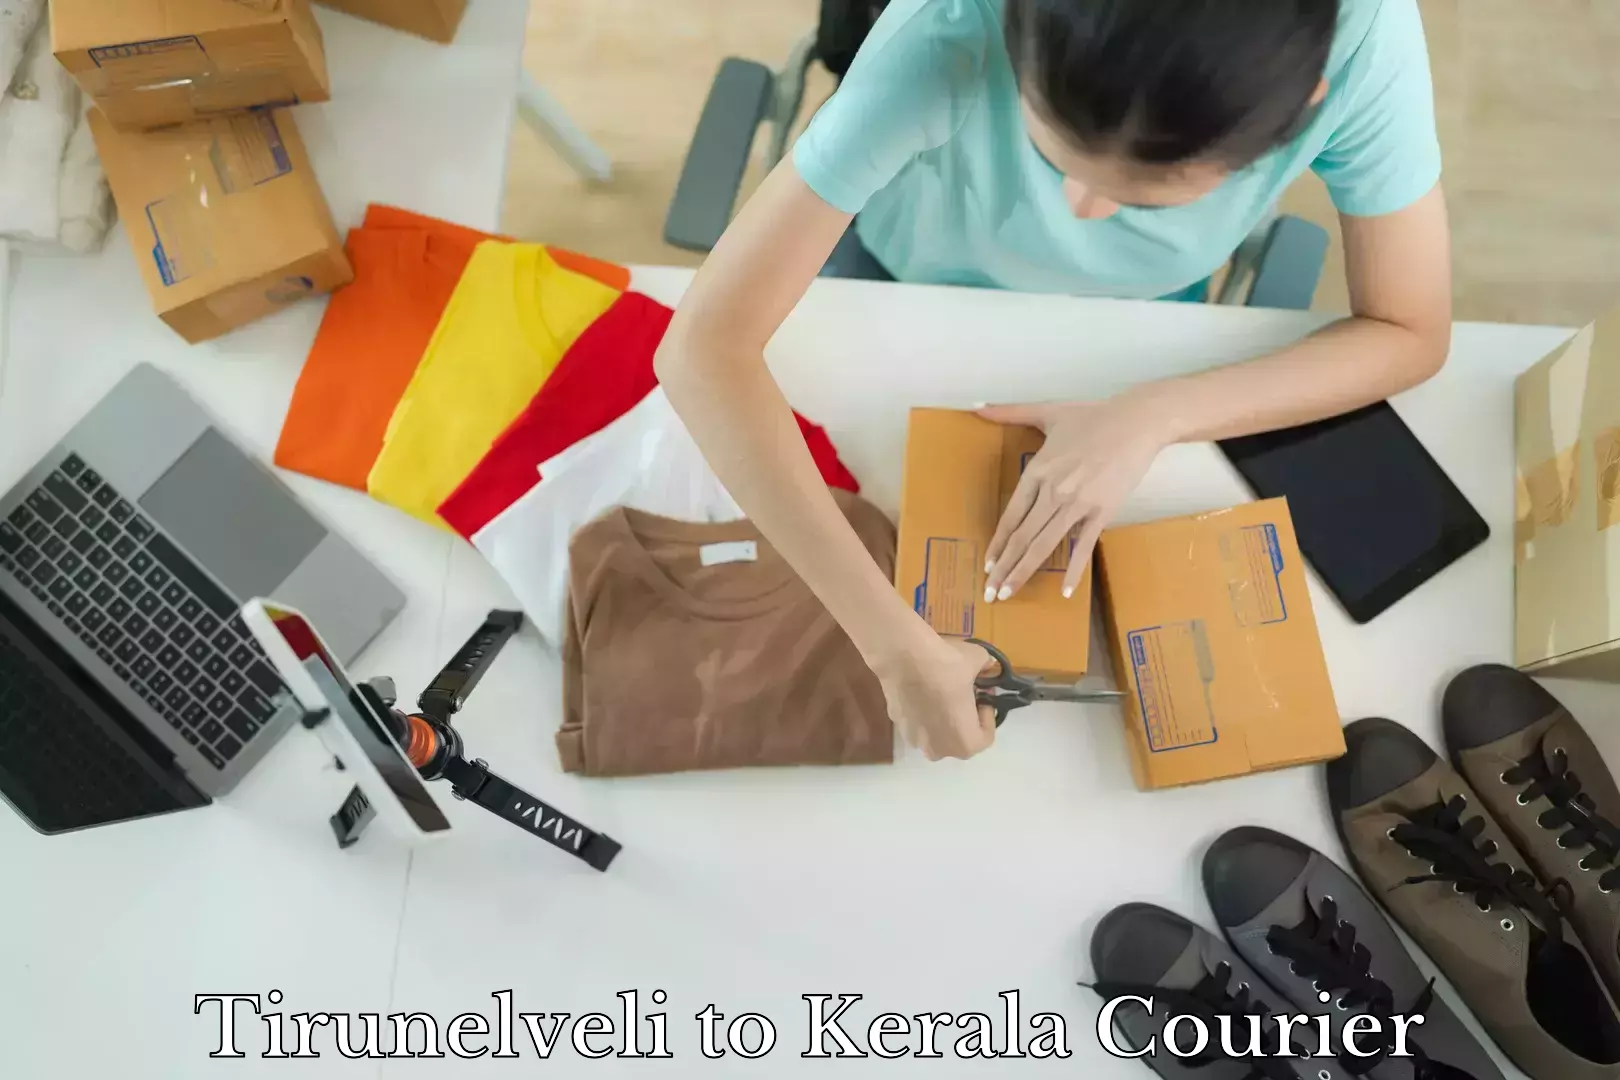 State-of-the-art courier technology in Tirunelveli to Kerala